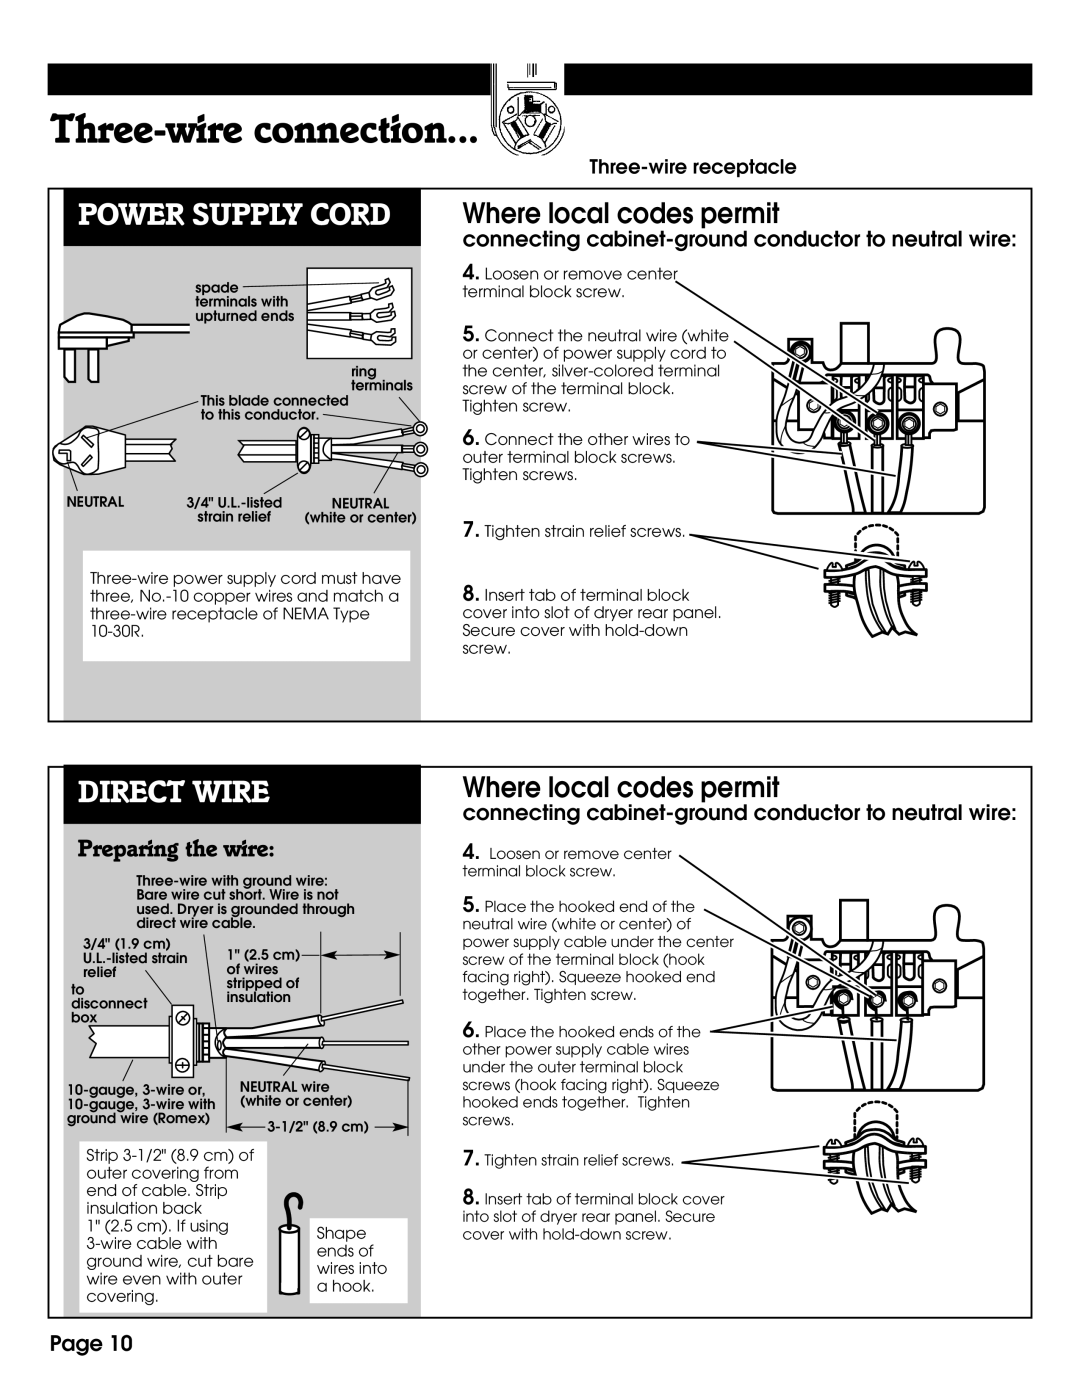 Whirlpool 8527795 Three-wire connection, Where local codes permit, connecting cabinet-ground conductor to neutral wire 